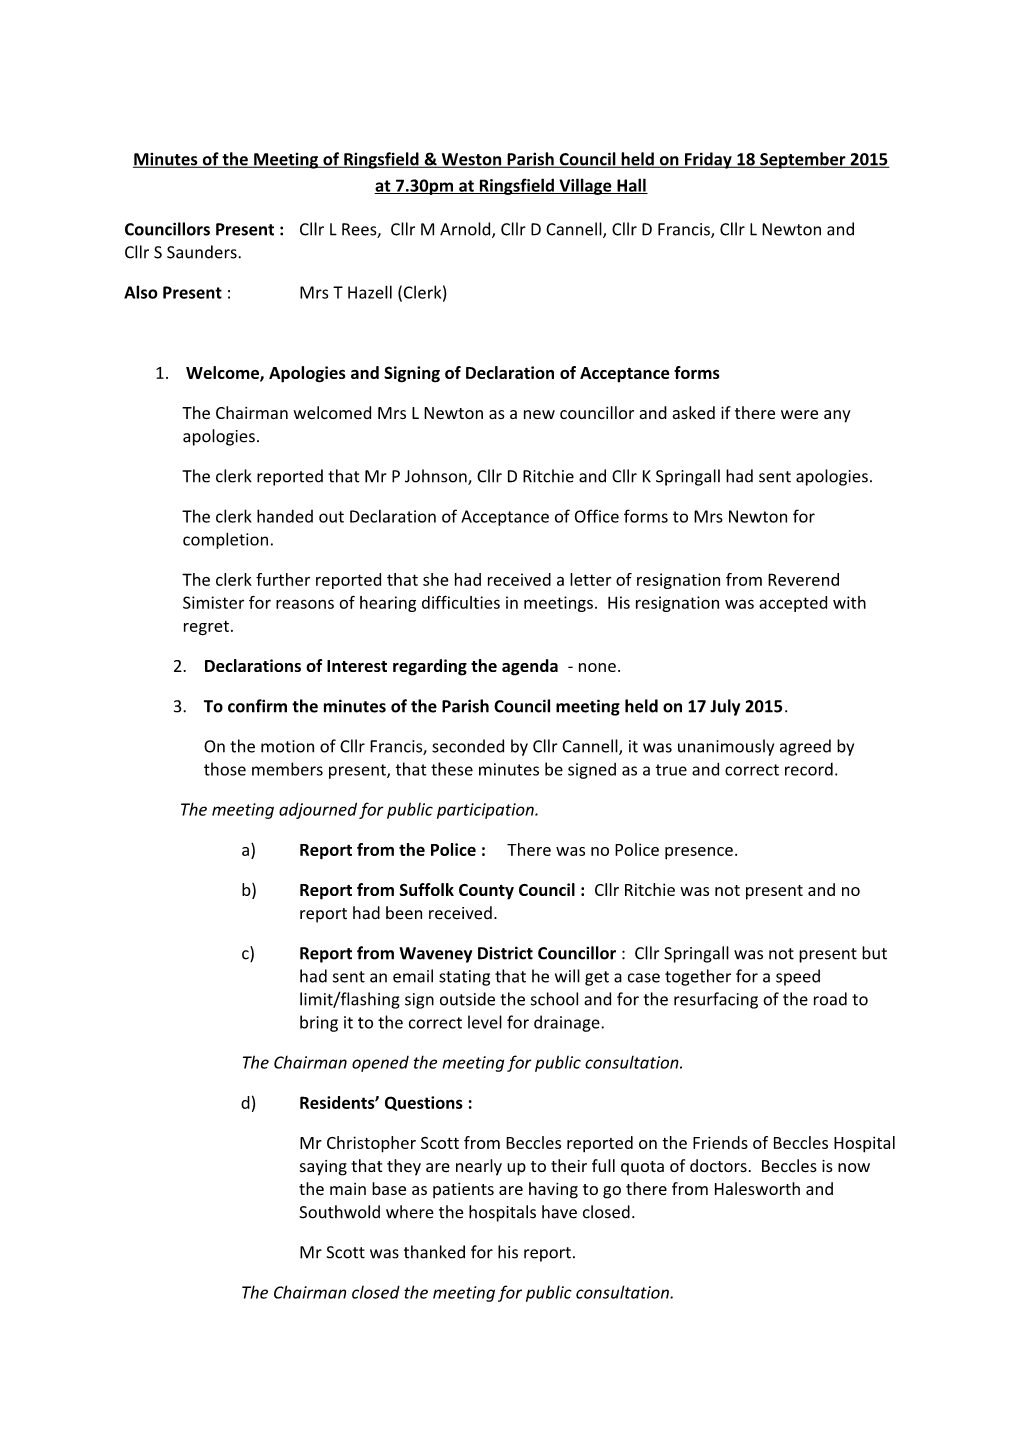 Minutes of the Meeting of Ringsfield & Weston Parish Council Held on Friday 18 September